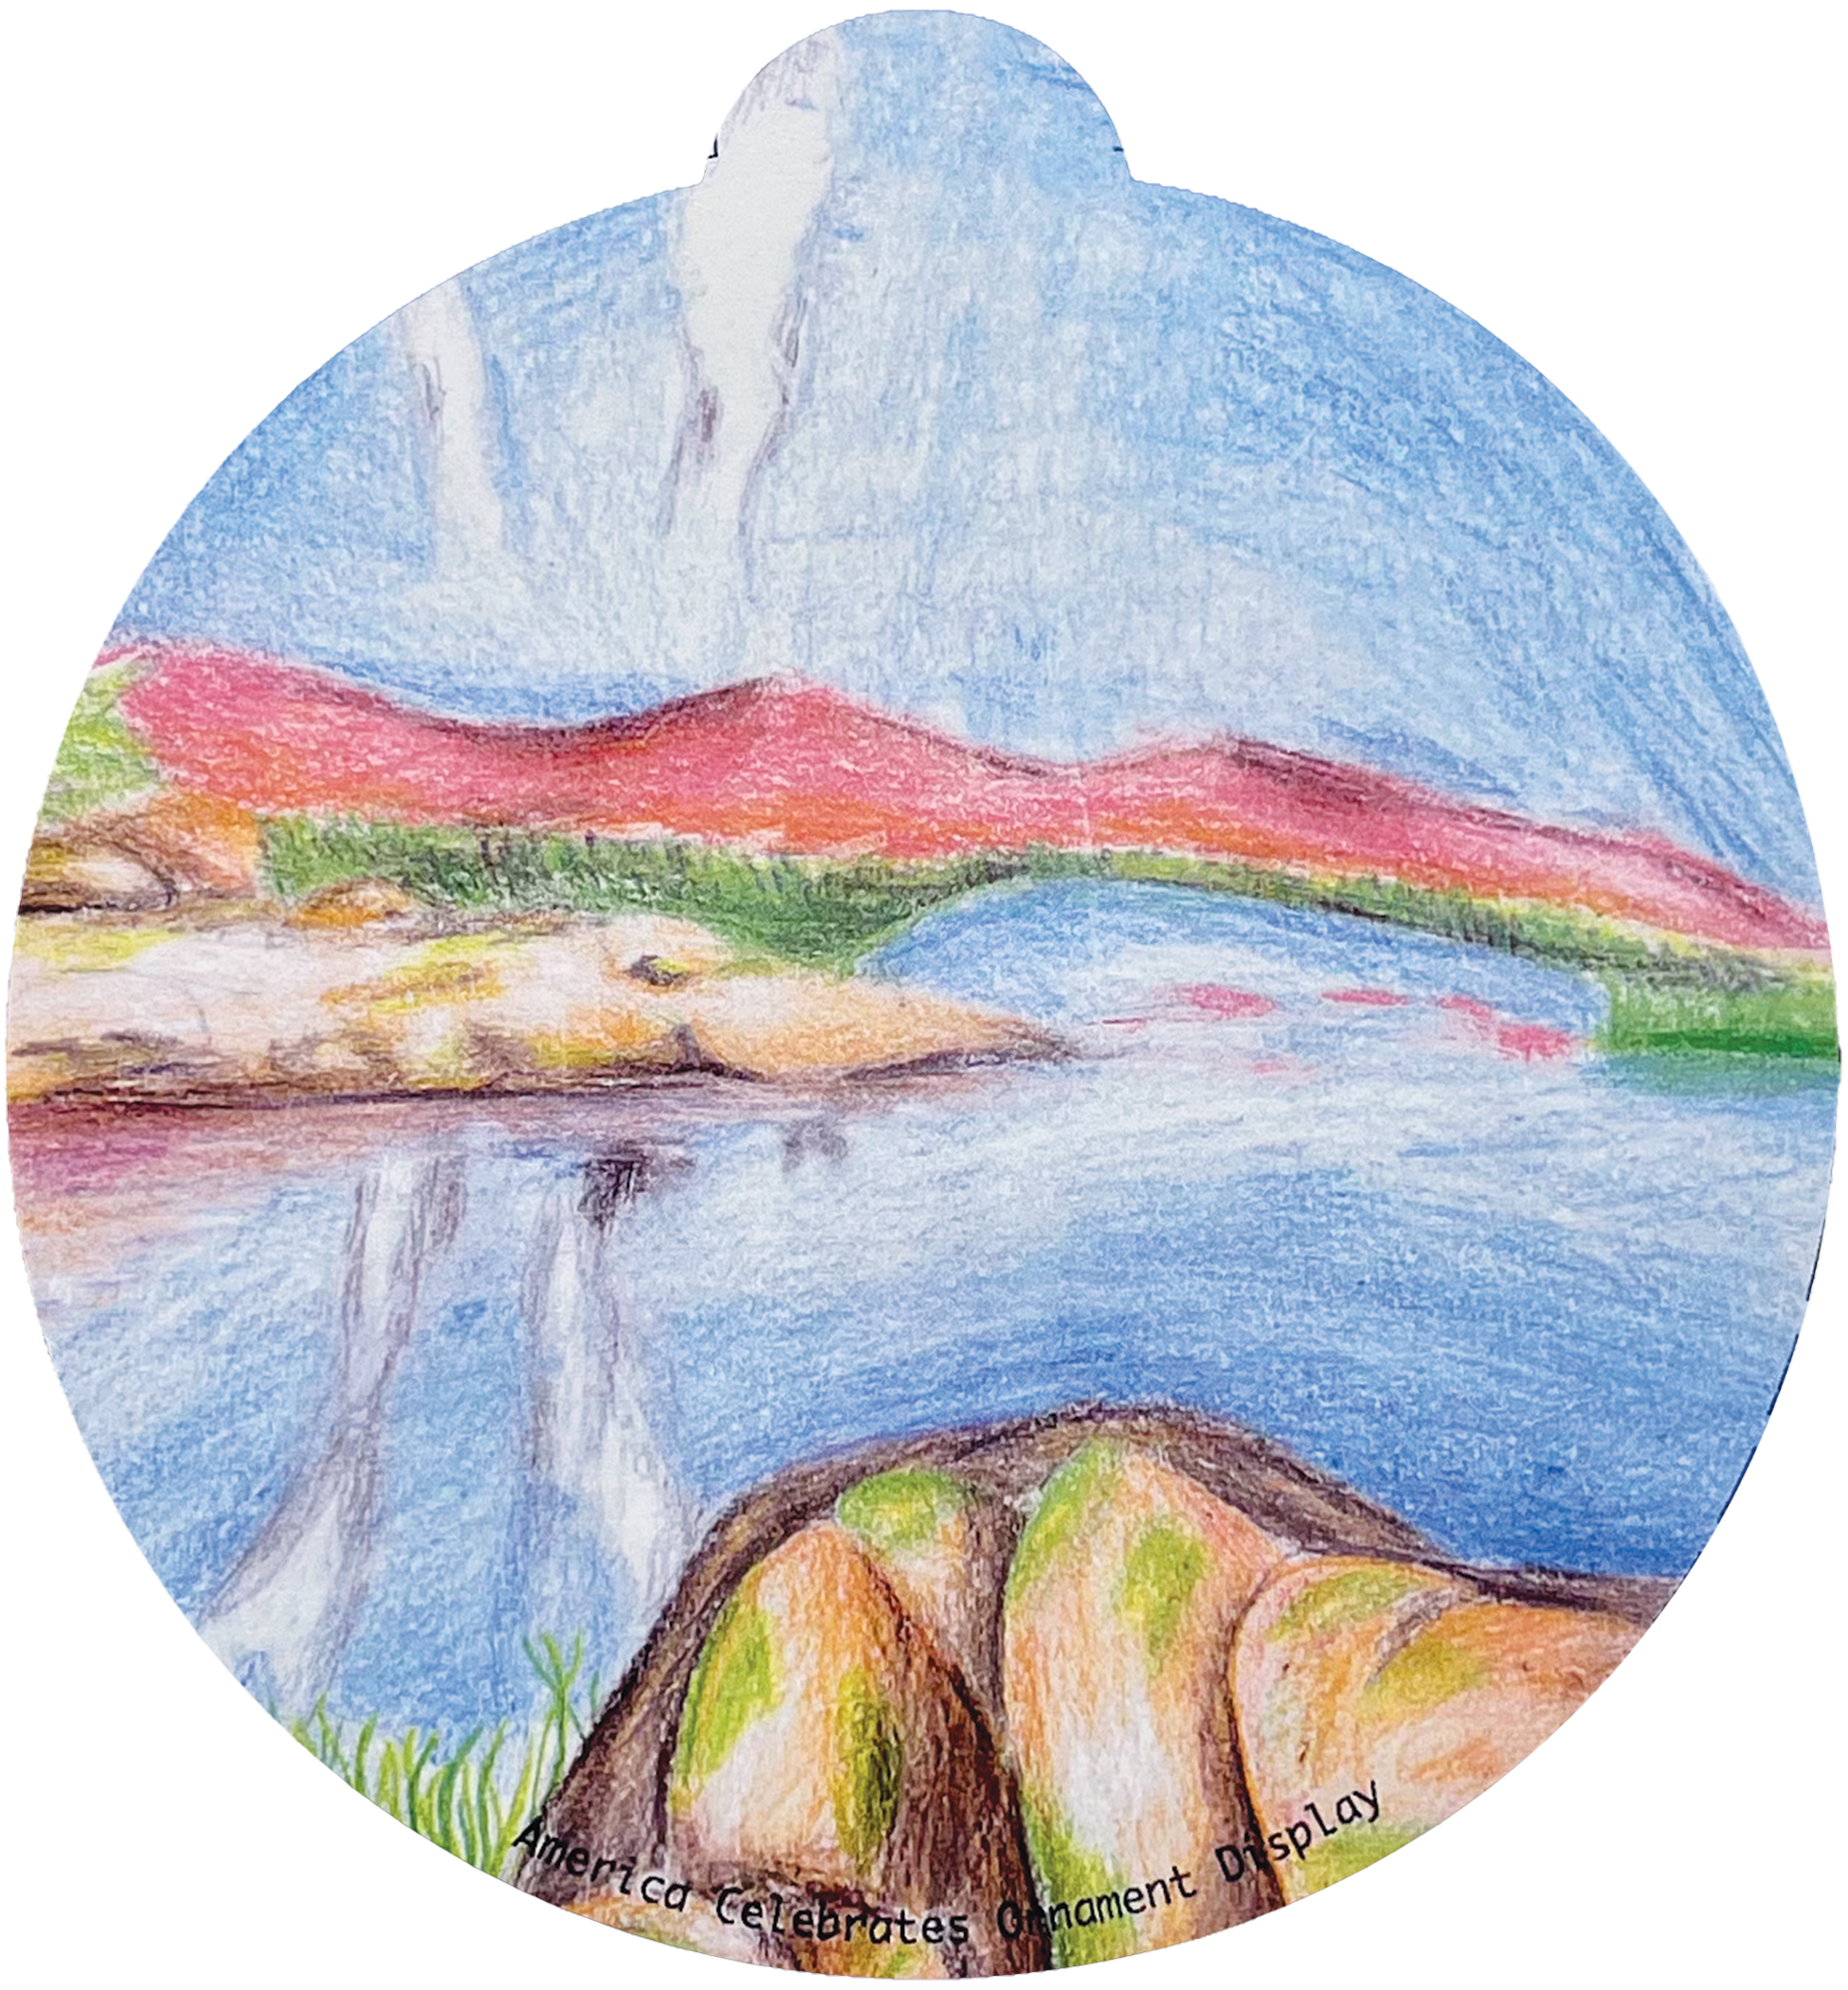 ornament depicting a body of water surrounded by technicolor mountains